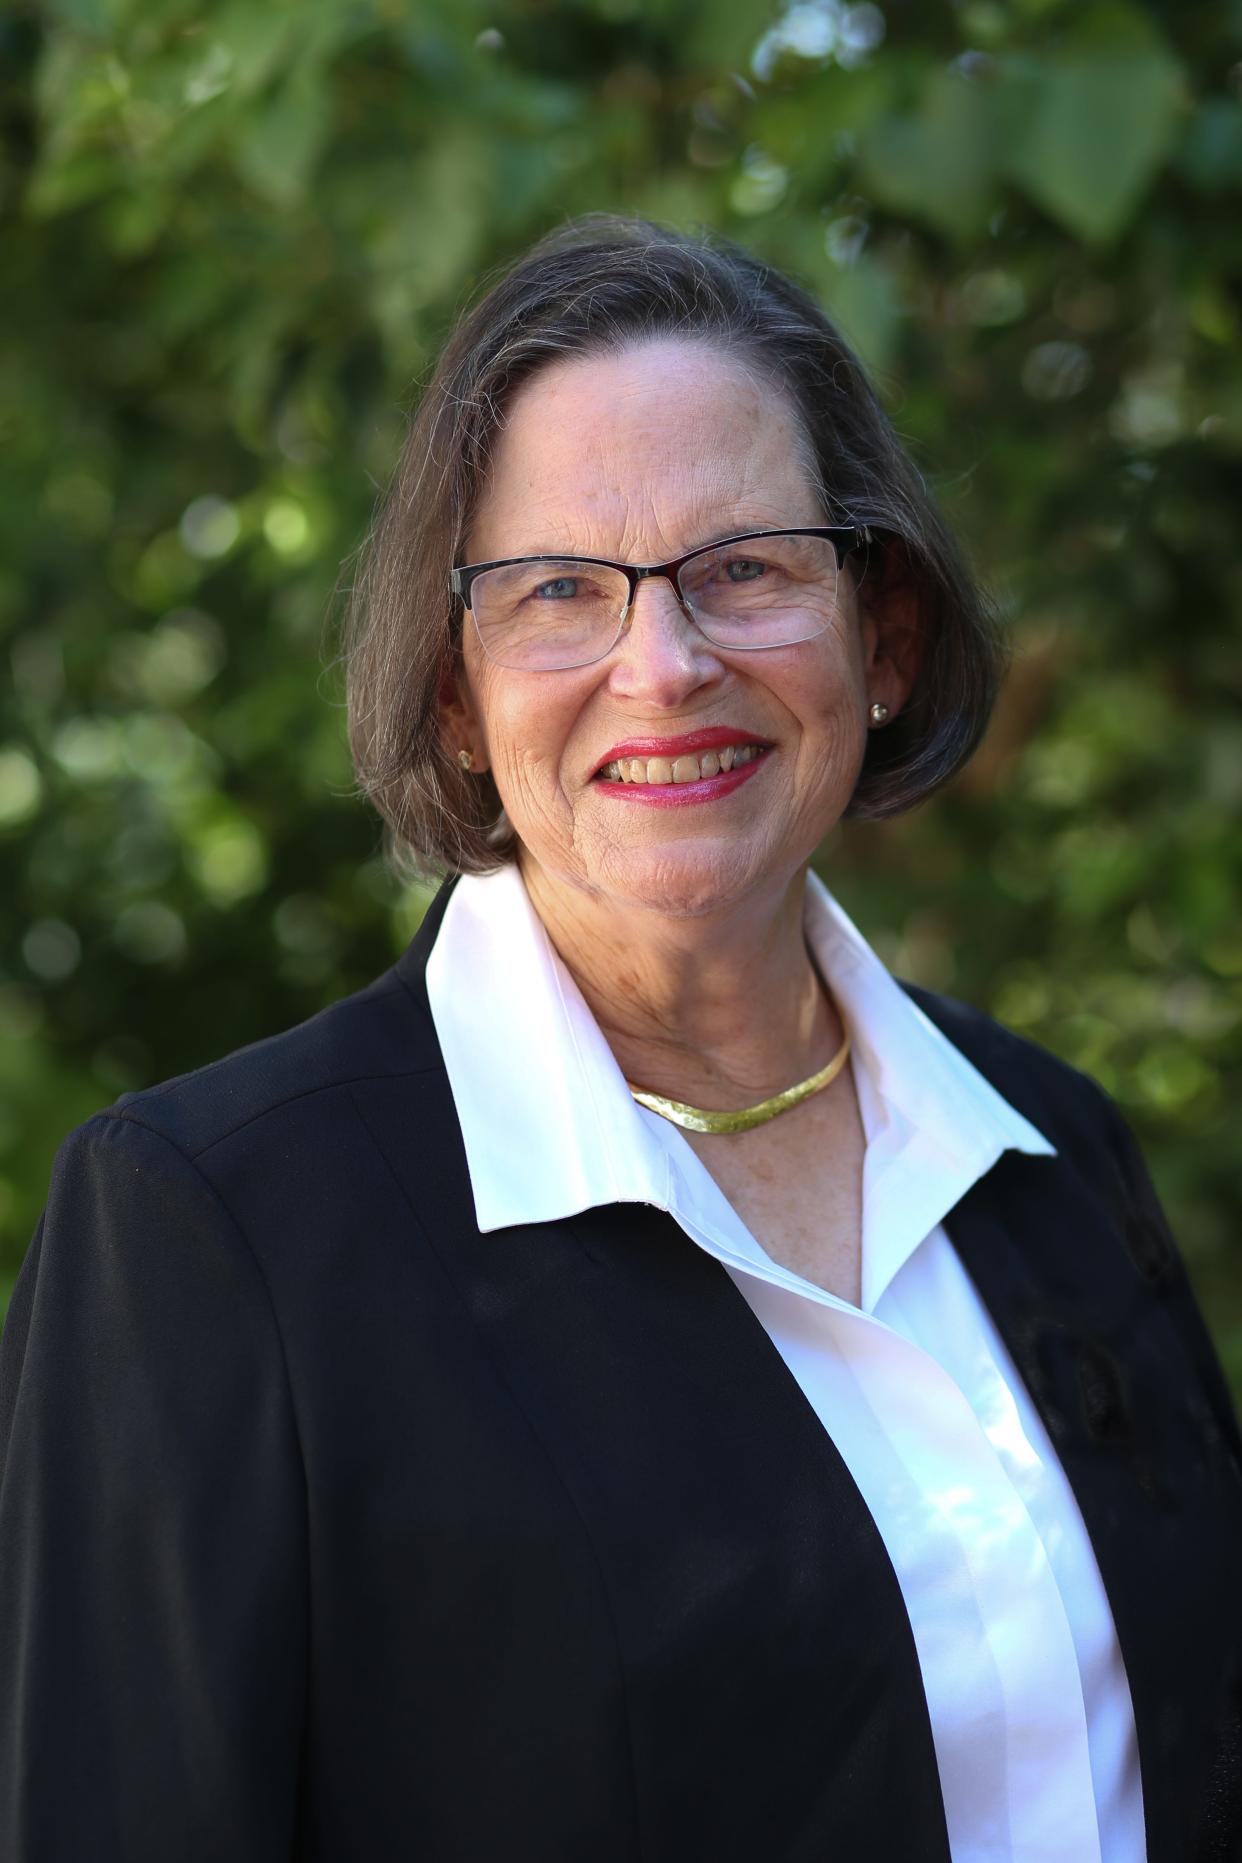 Longtime Waco resident and Scouting volunteer Ellie Morrison has been named to serve on the newly reorganized National Executive Board (NEB) for Boy Scouts of America.